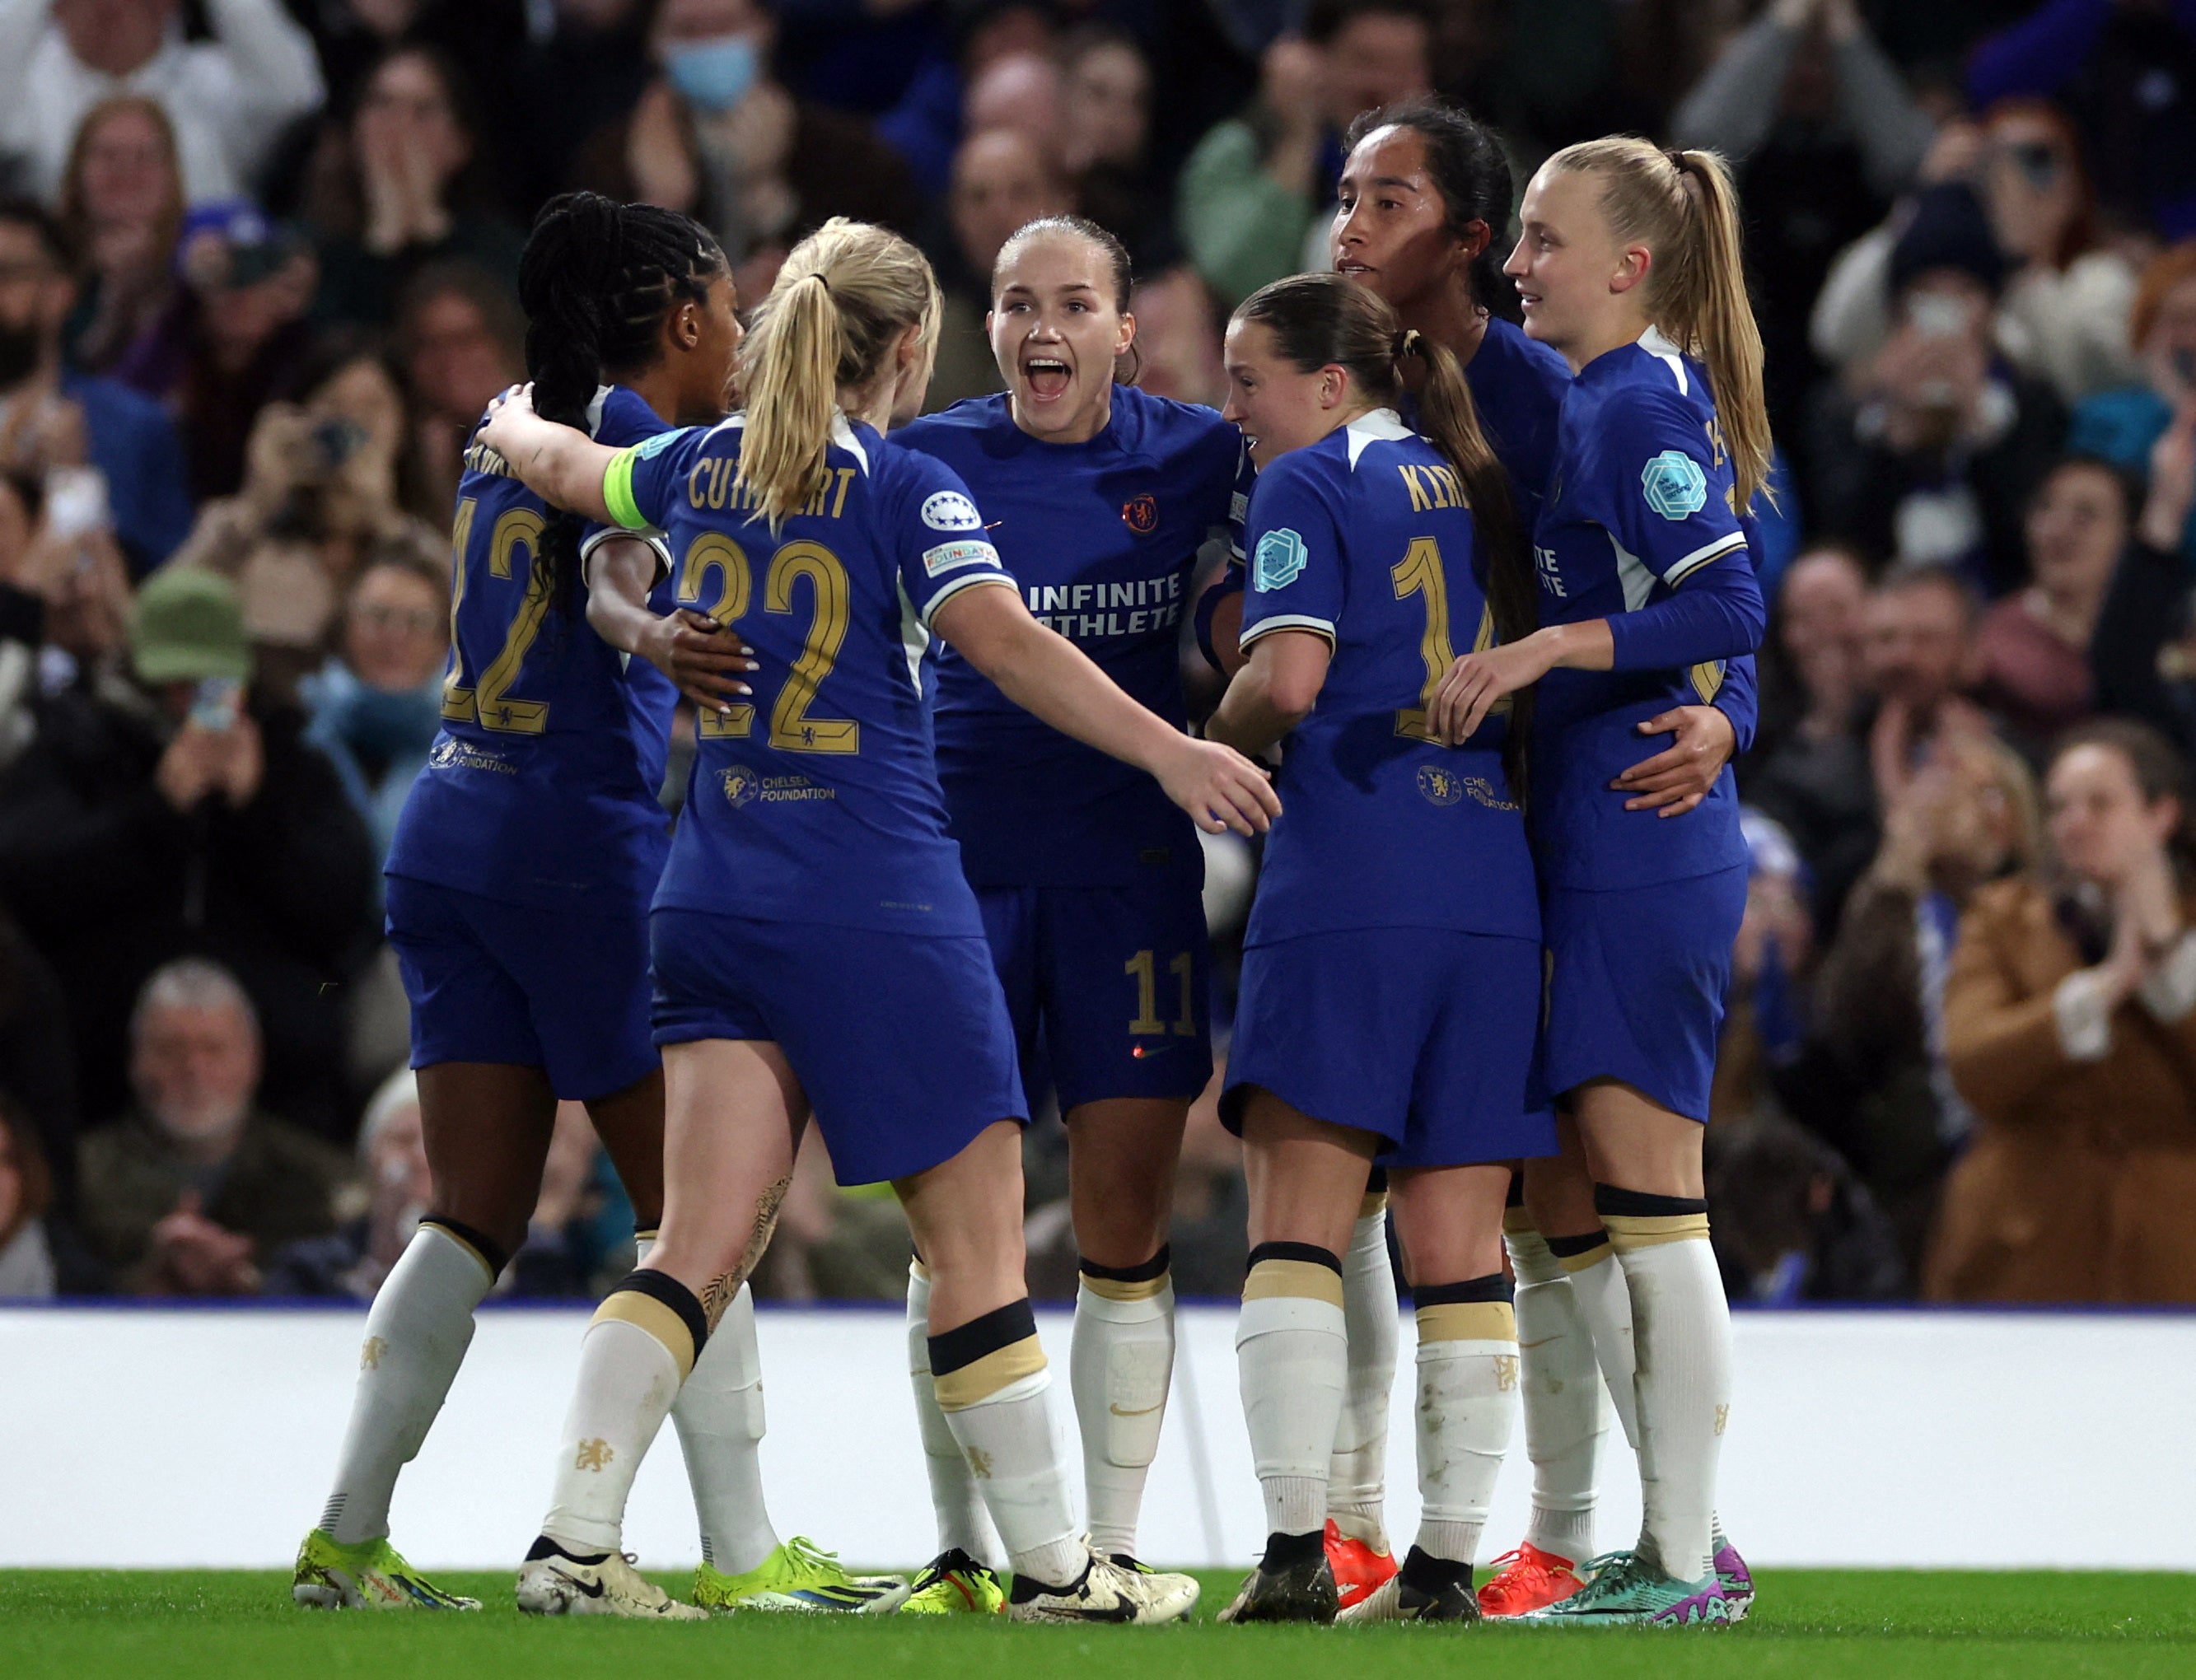 Chelsea returned to the Champions League semi-finals with a 4-1 aggregate win over Ajax